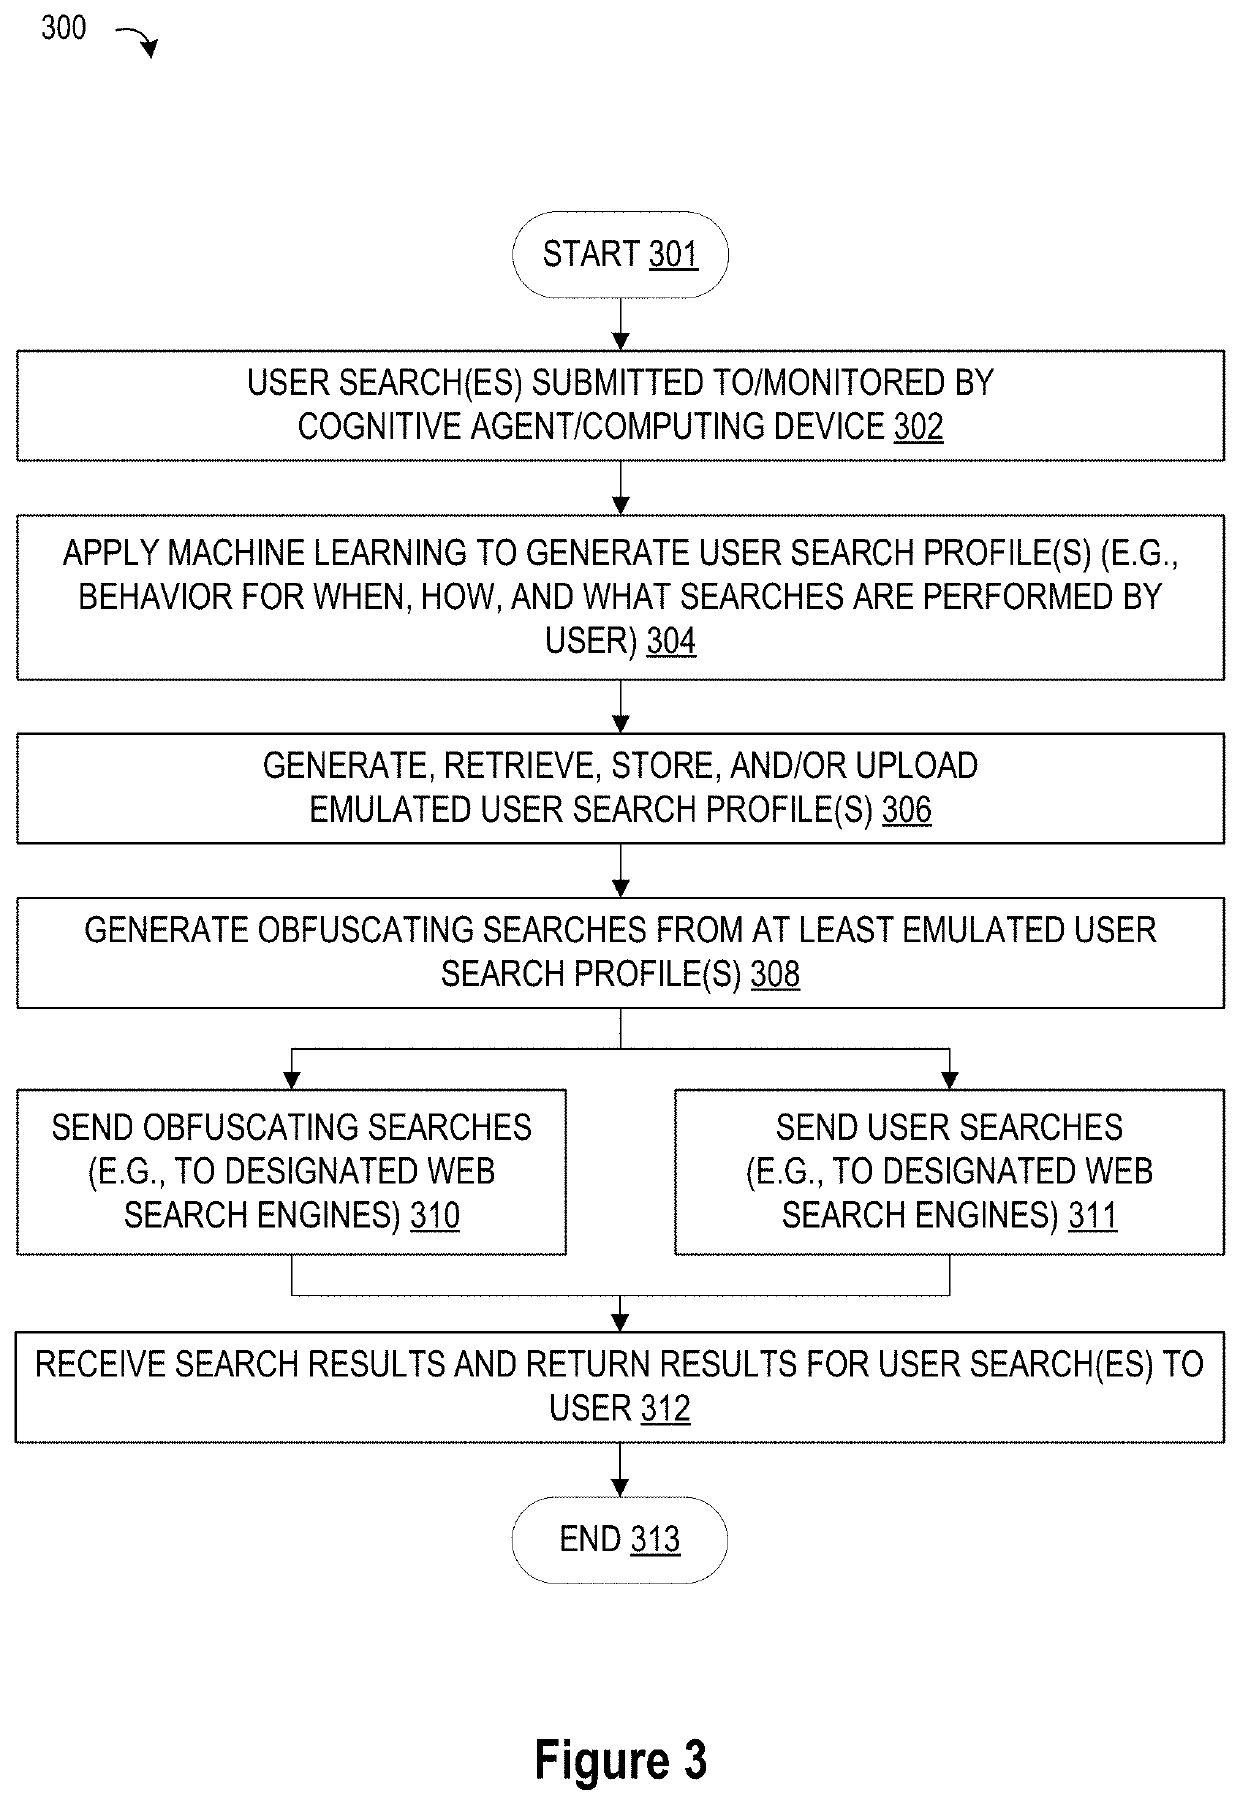 System and method for monitoring user searches to obfuscate web searches by using emulated user profiles